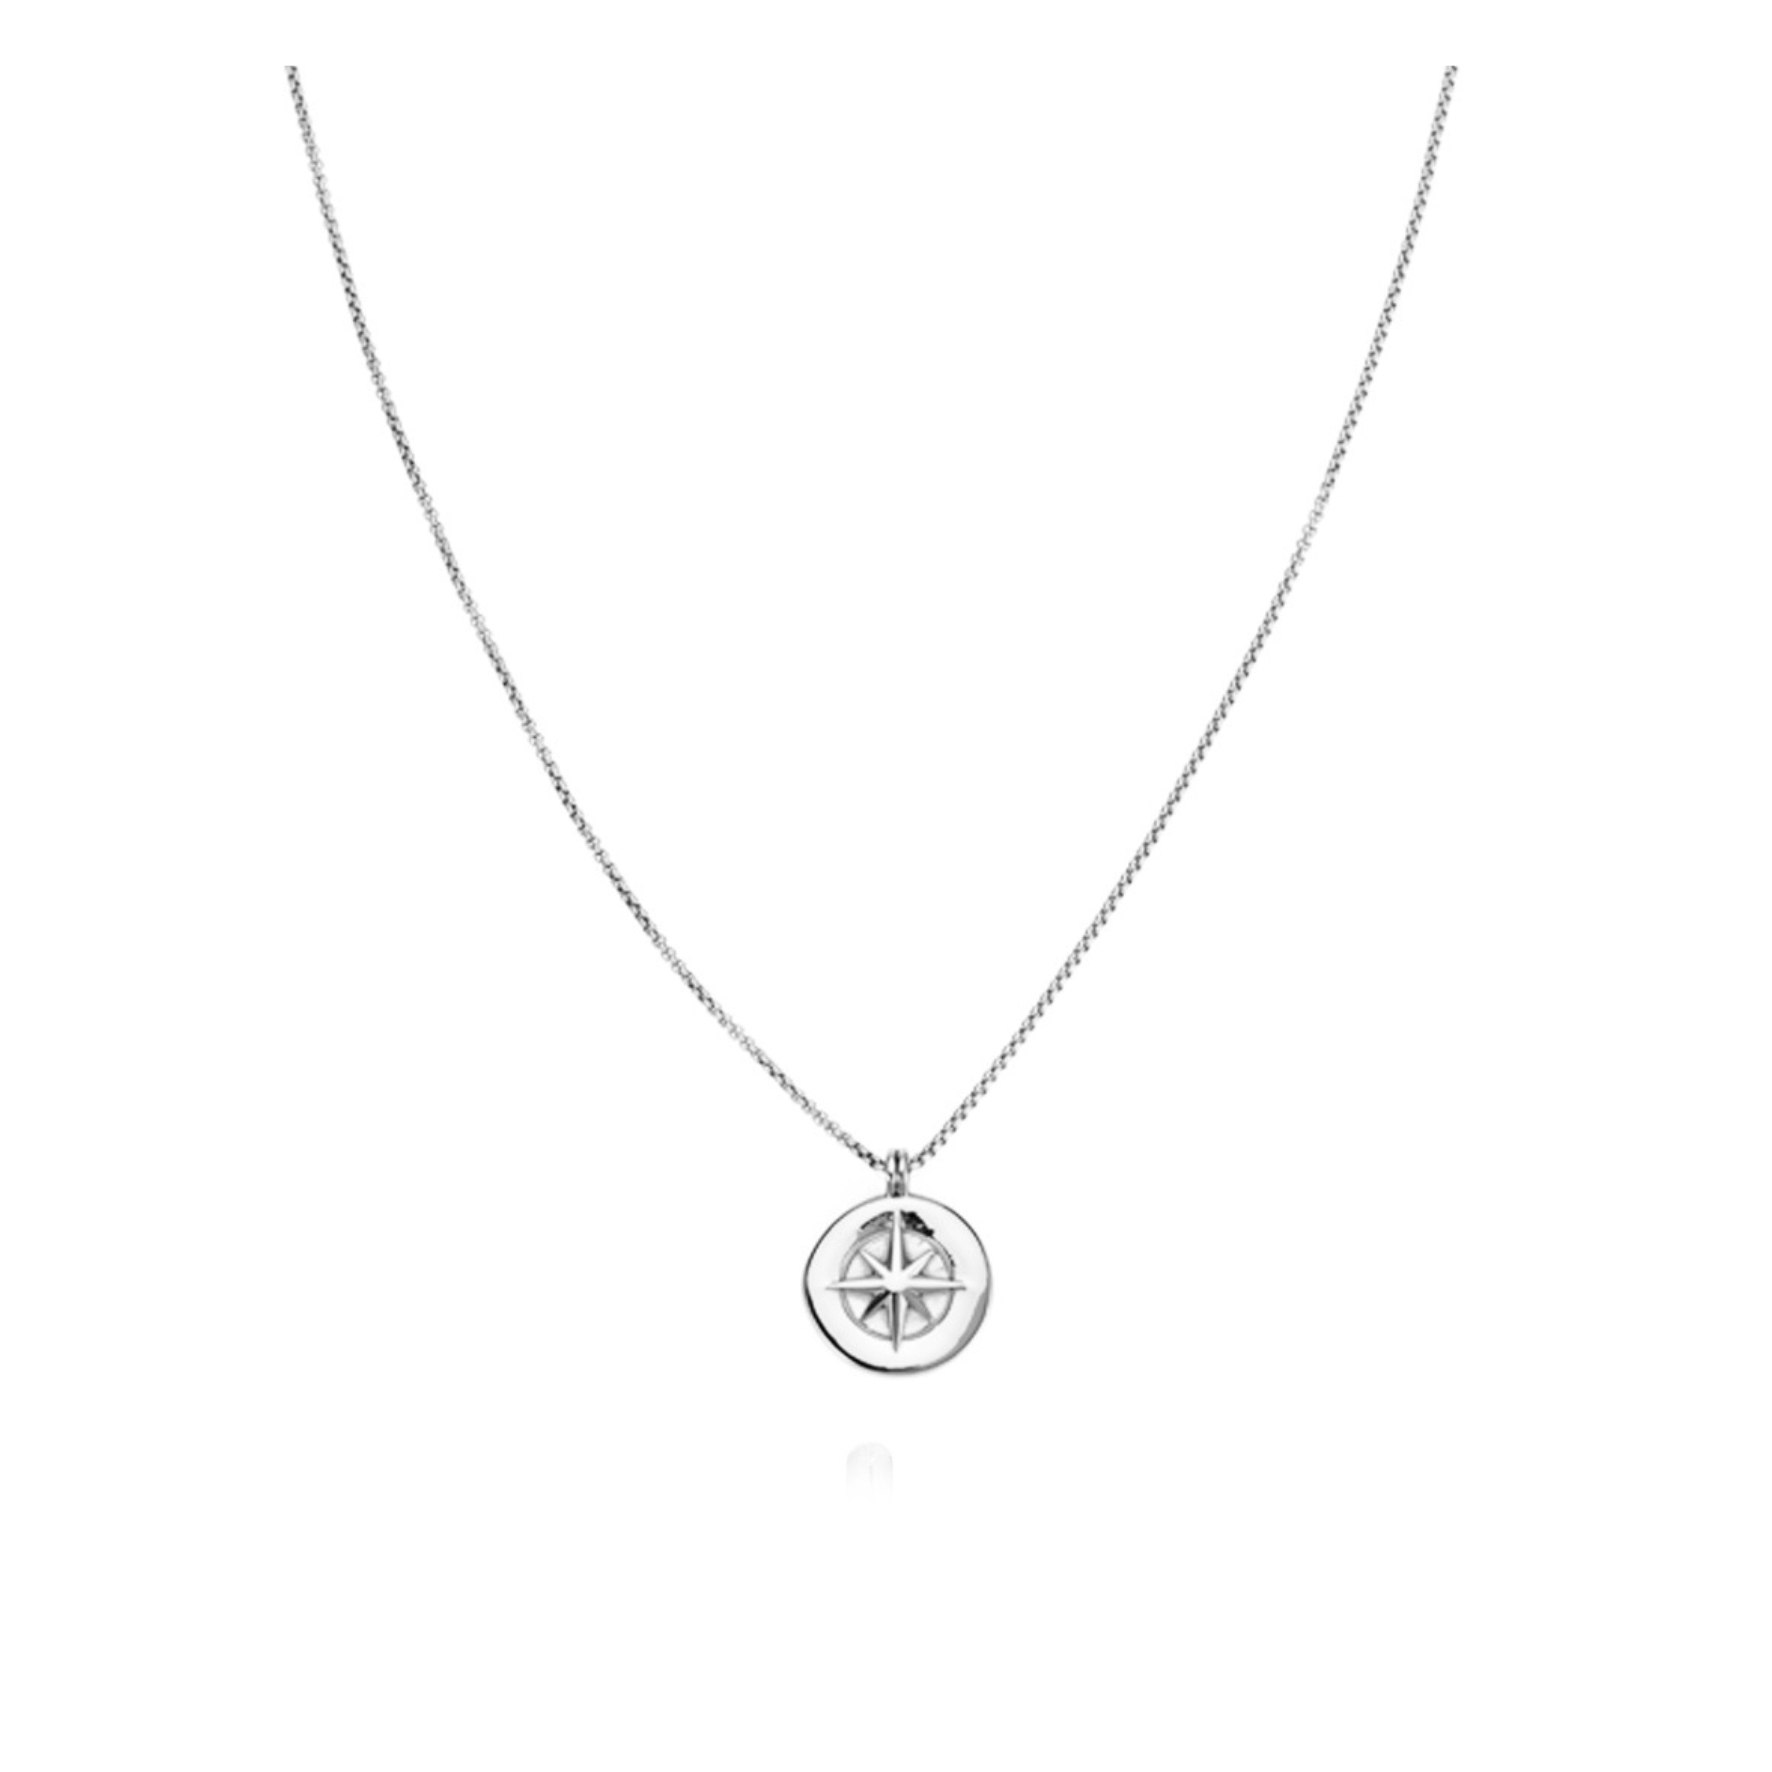 Small Compass Necklace from SAMIE in Stainless steel